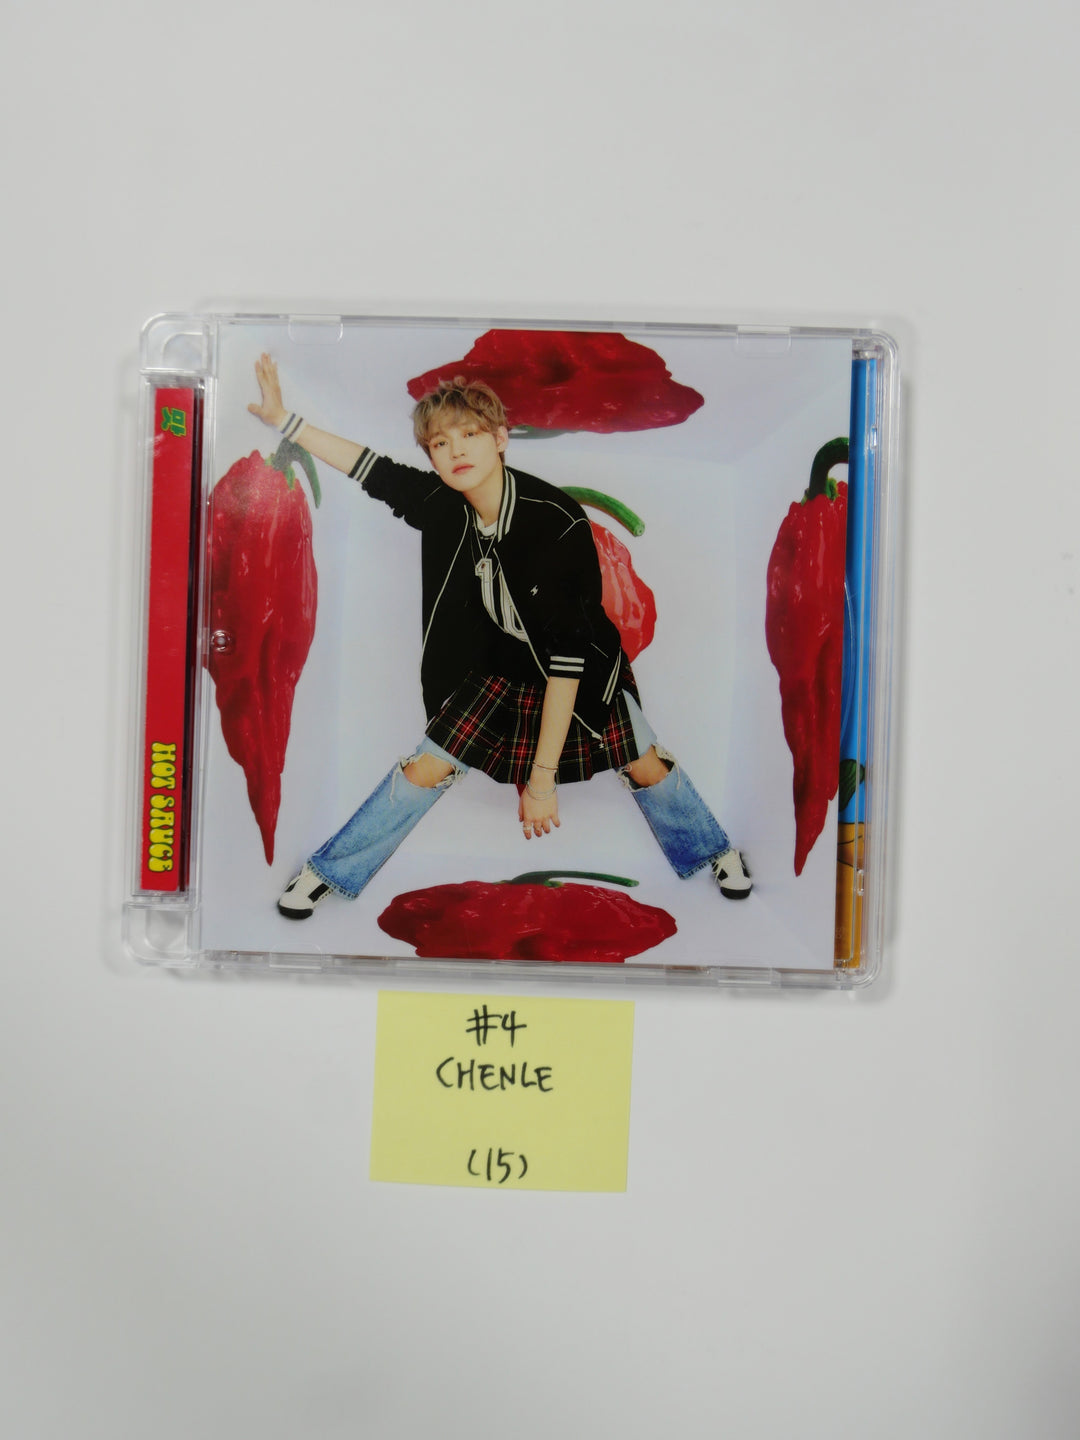 NCT Dream "Hot Saucce" - CASE + CD ONLY (NO PHOTOCARDS)